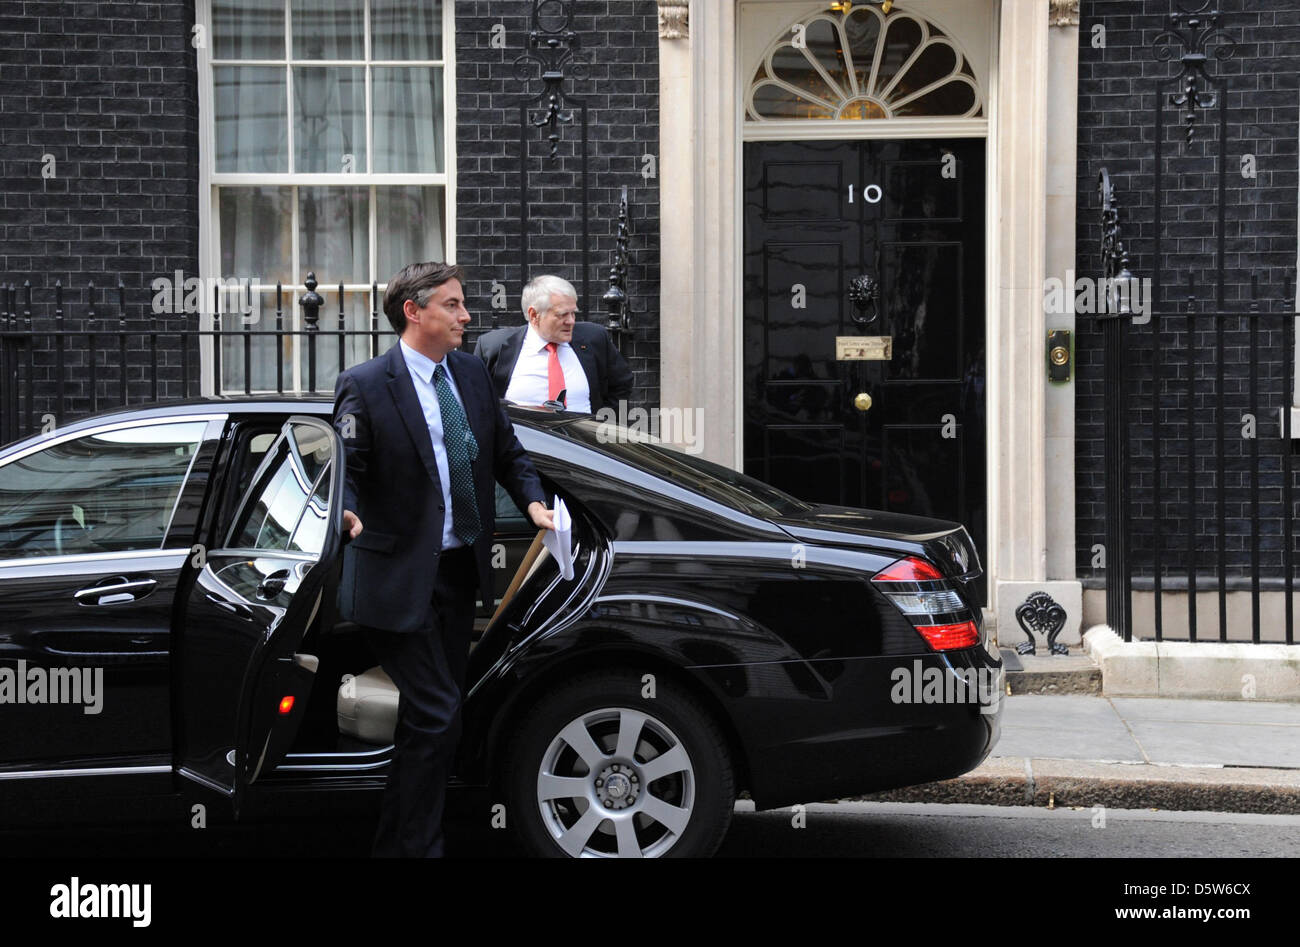 Premier of Lower Saxony David McAllister (CDU, L) and the German ambassador in London, Georg Boomgaarden, arrive with their car in front of 10 Downingstreet, the official residence of the British Prime Minister, in London, Great Britain, 04 October 2012. McAllister is in London to attract loan items for the state exhibition 2014 on the occasion of the 300 anniversary of the Hanover Stock Photo